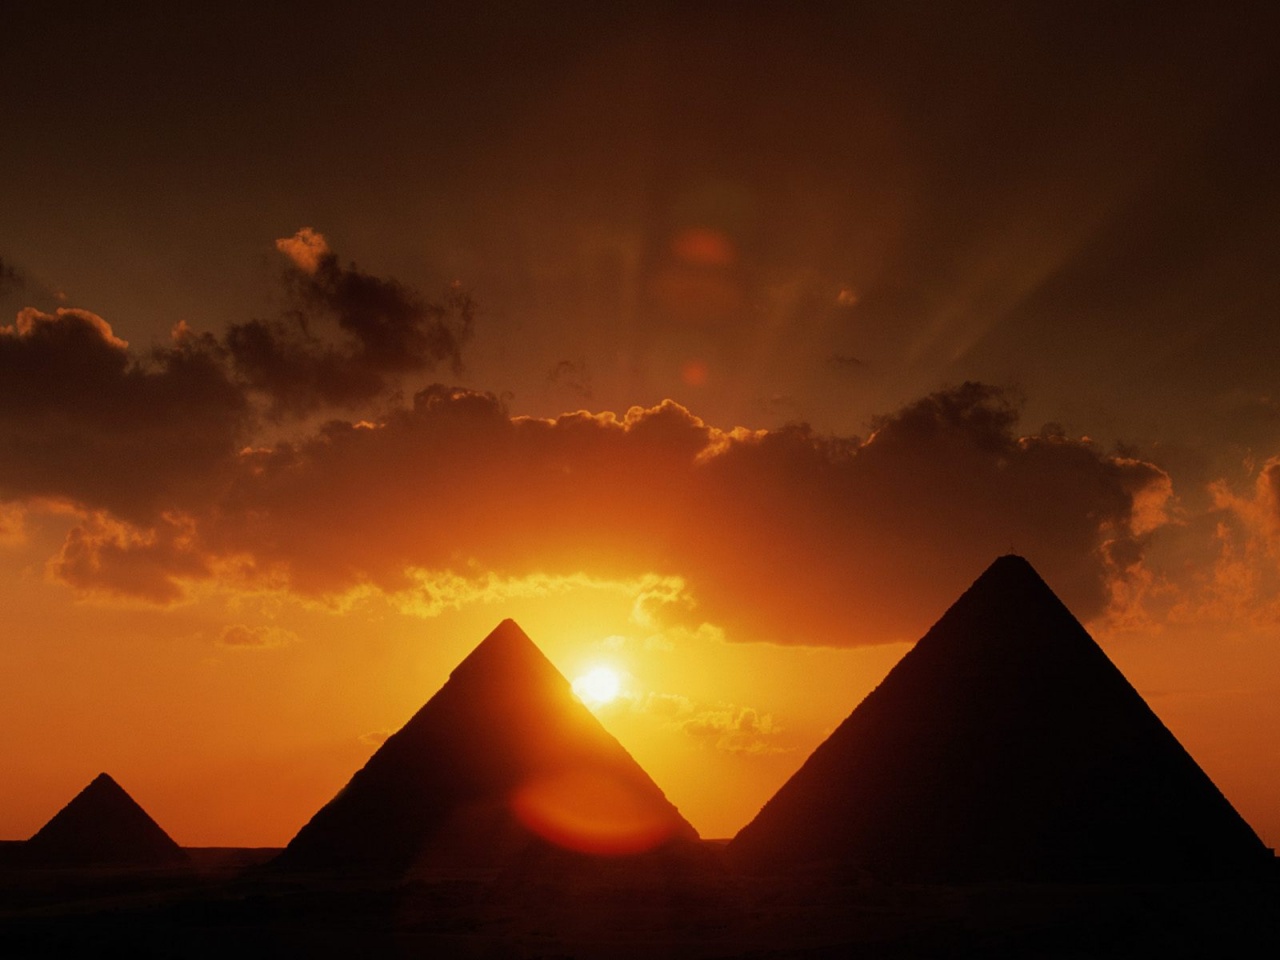 Egypt Image HD Wallpaper And Background Photos